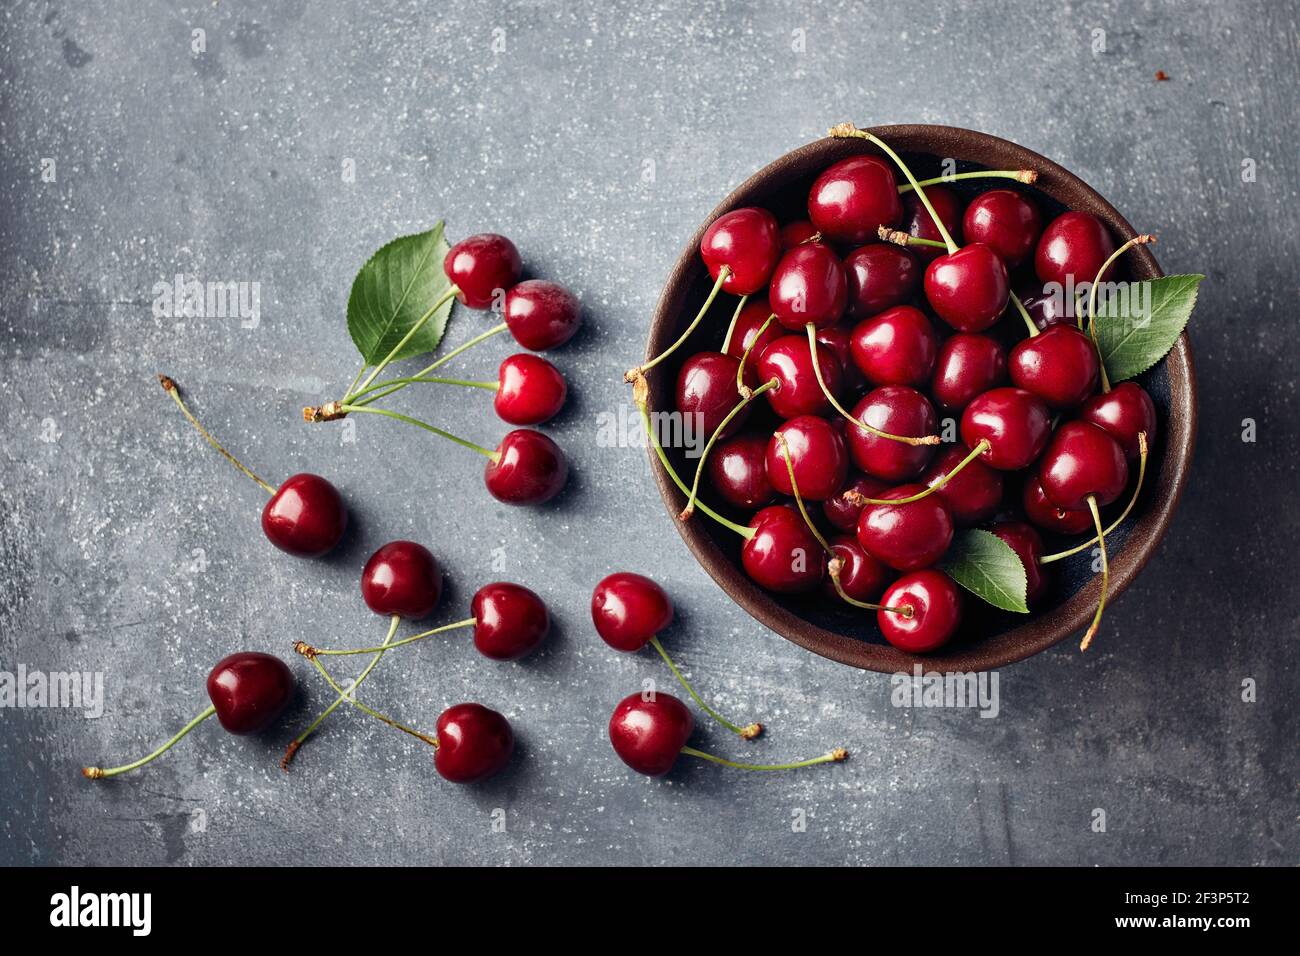 Cherries in a small bowl and scattered around the table. Stock Photo